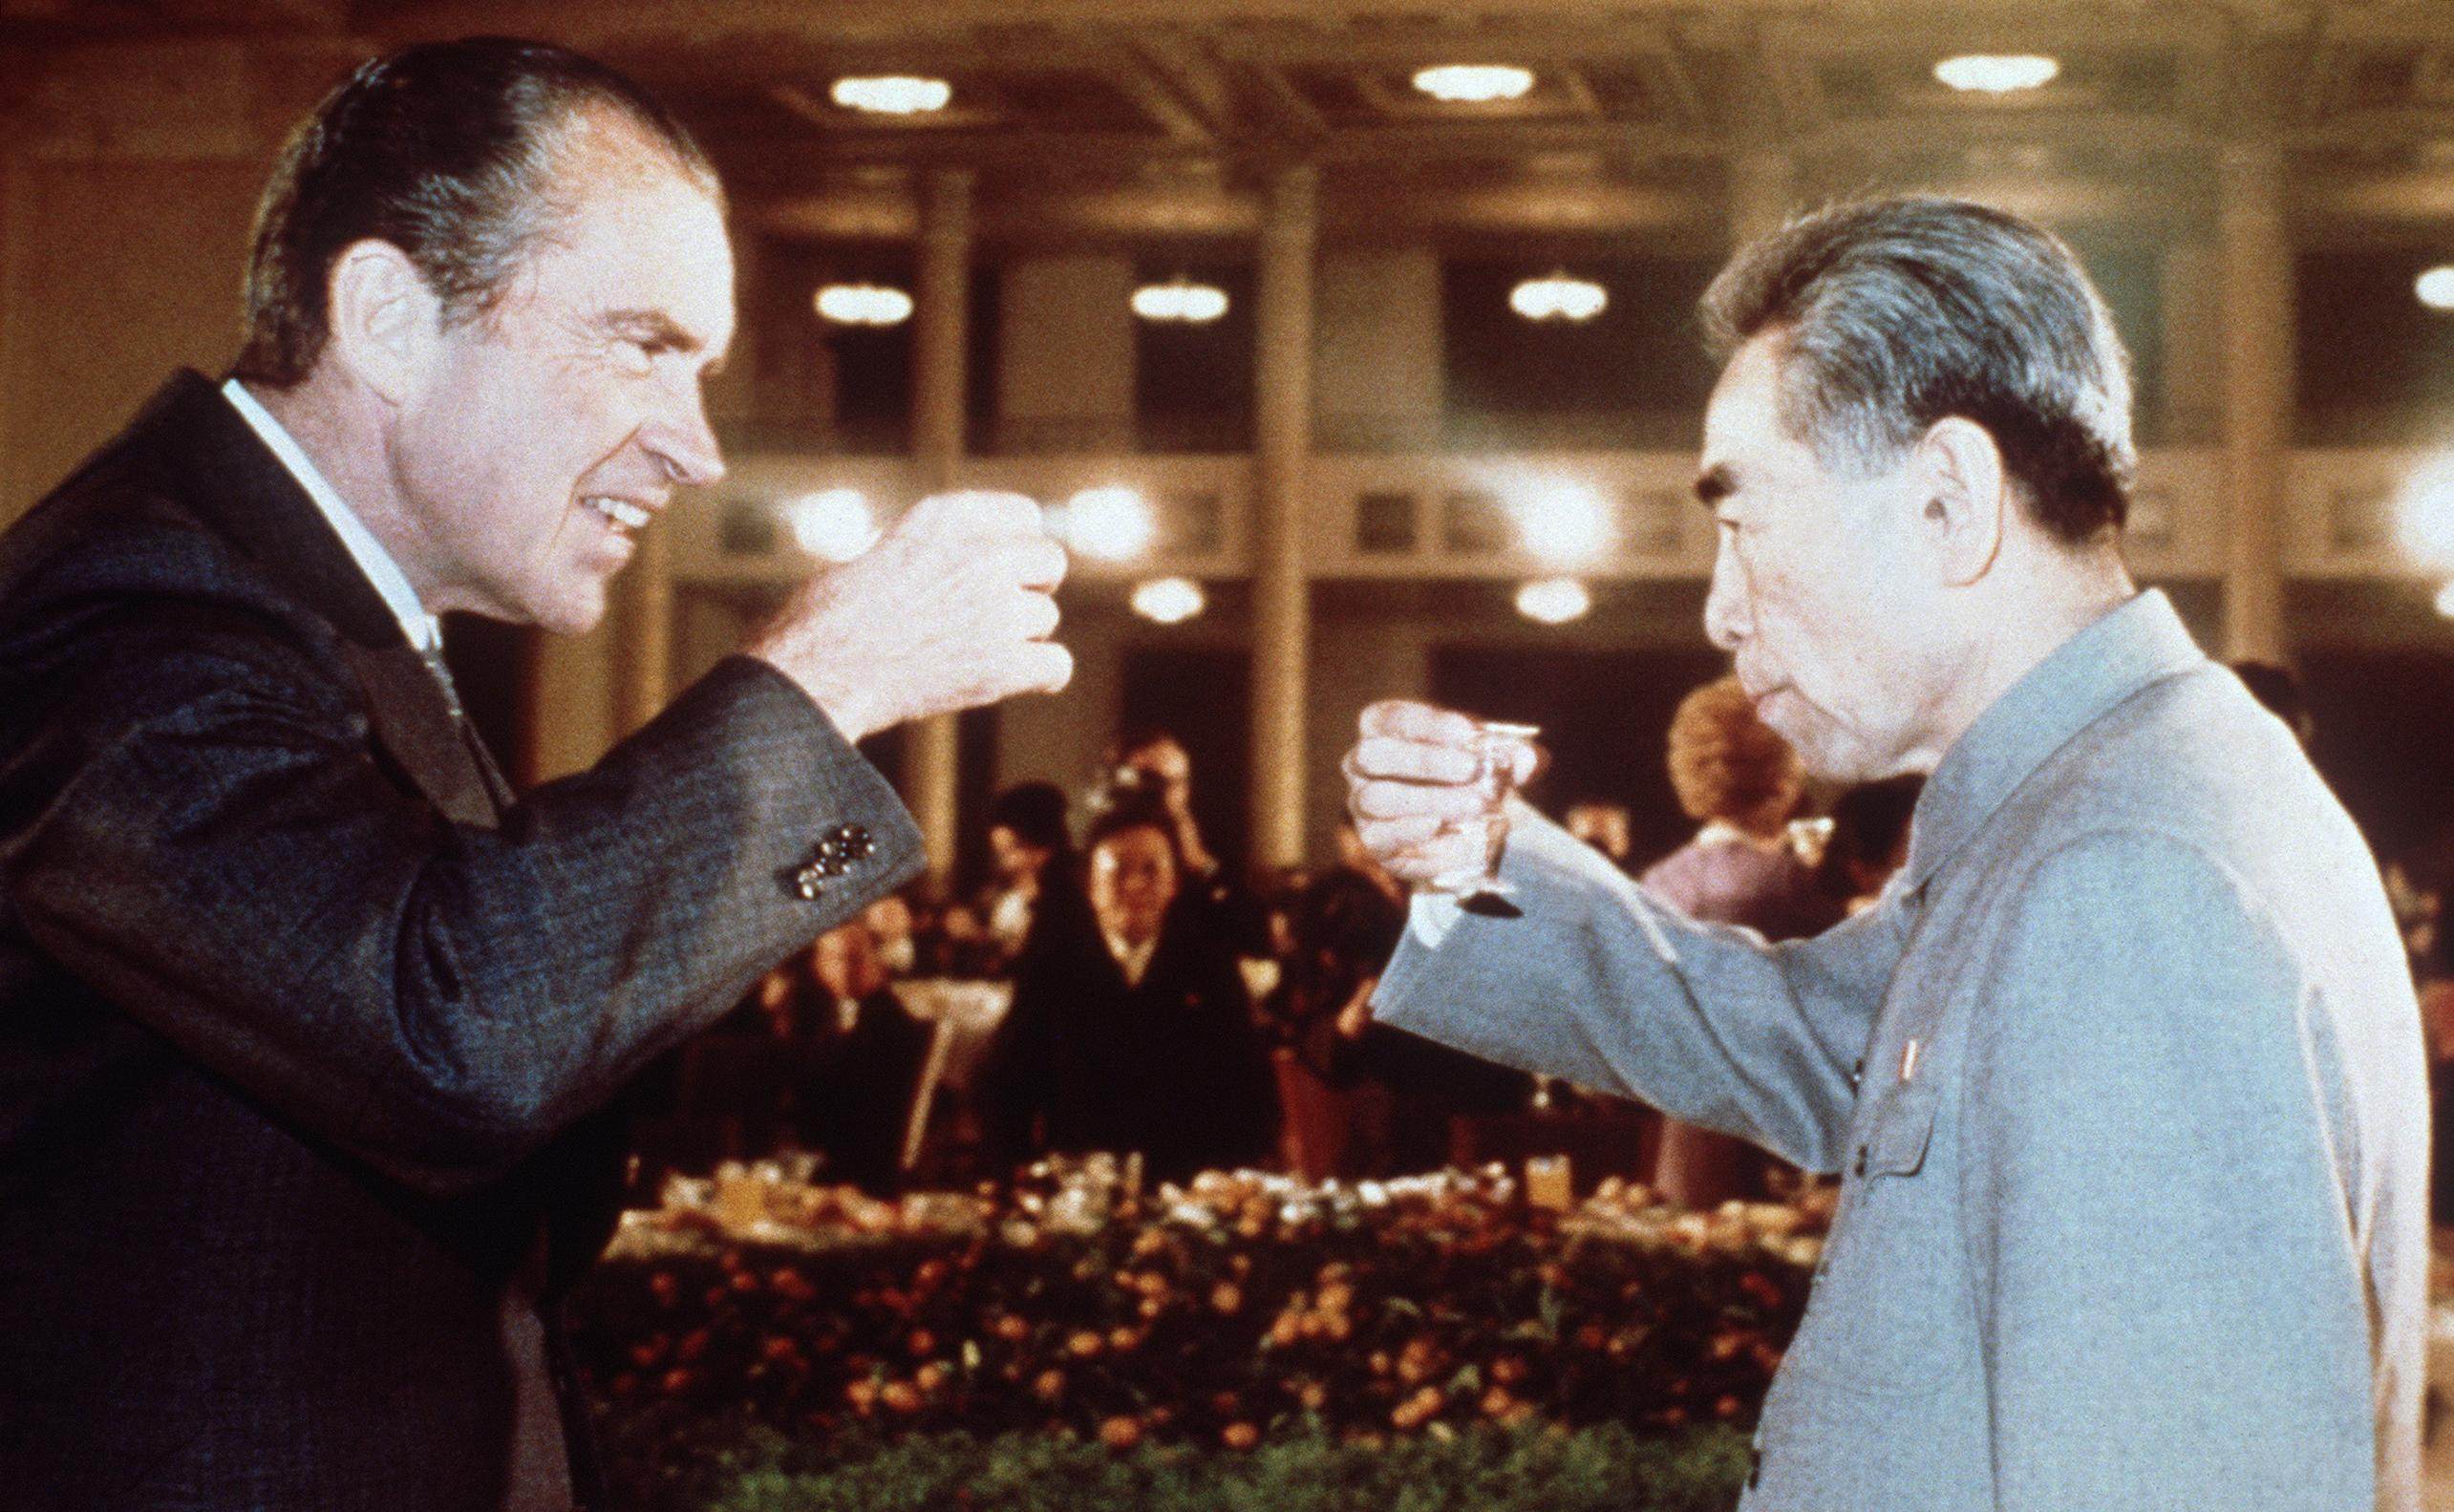 US president Richard Nixon toasts with Chinese premier Zhou Enlai in February 1972 in Beijing, during his official visit to China. Photo: AFP